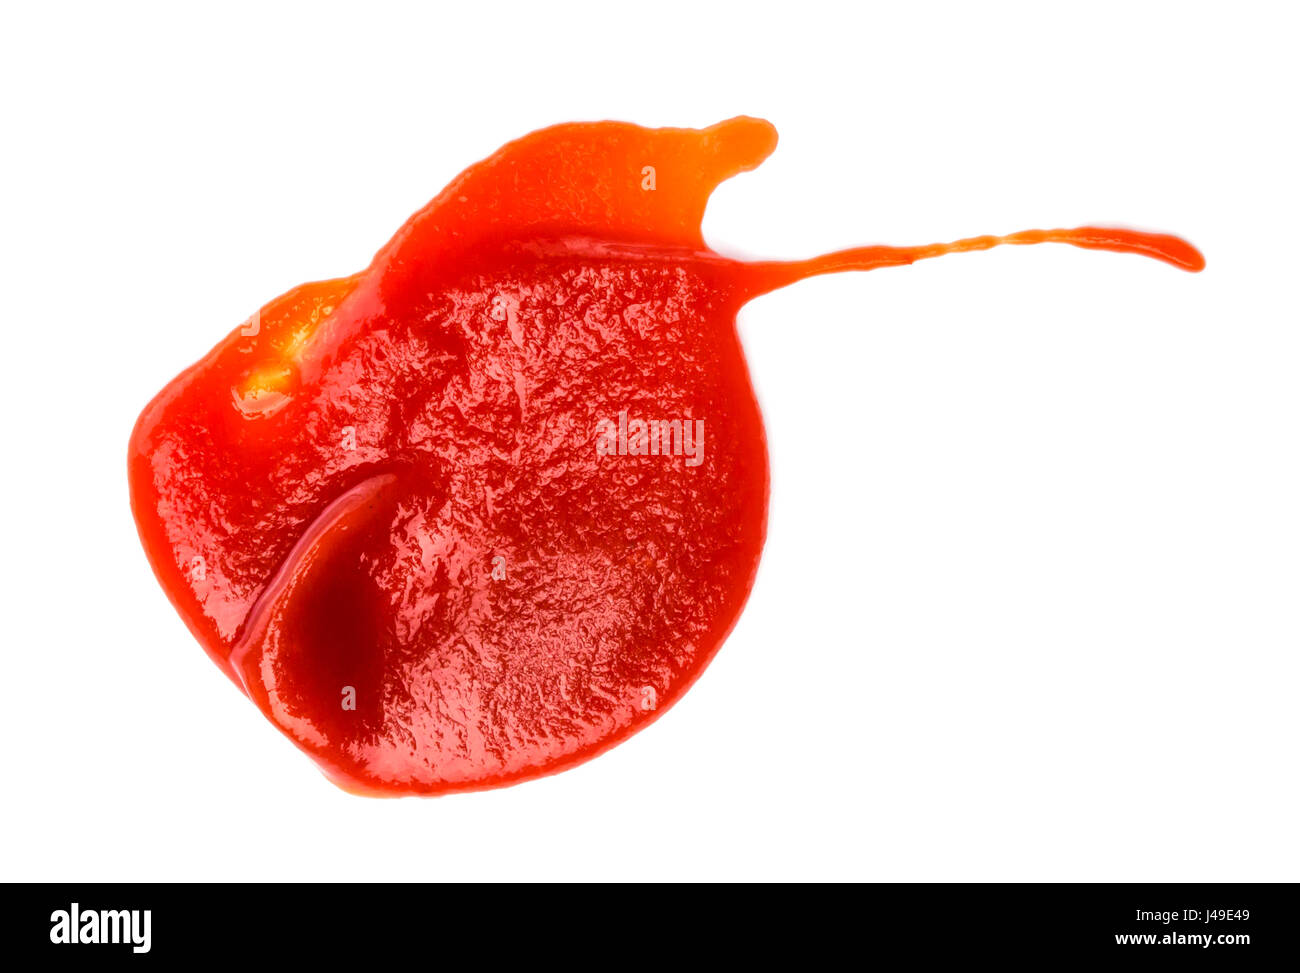 Ketchup or tomato sauce isolated Stock Photo